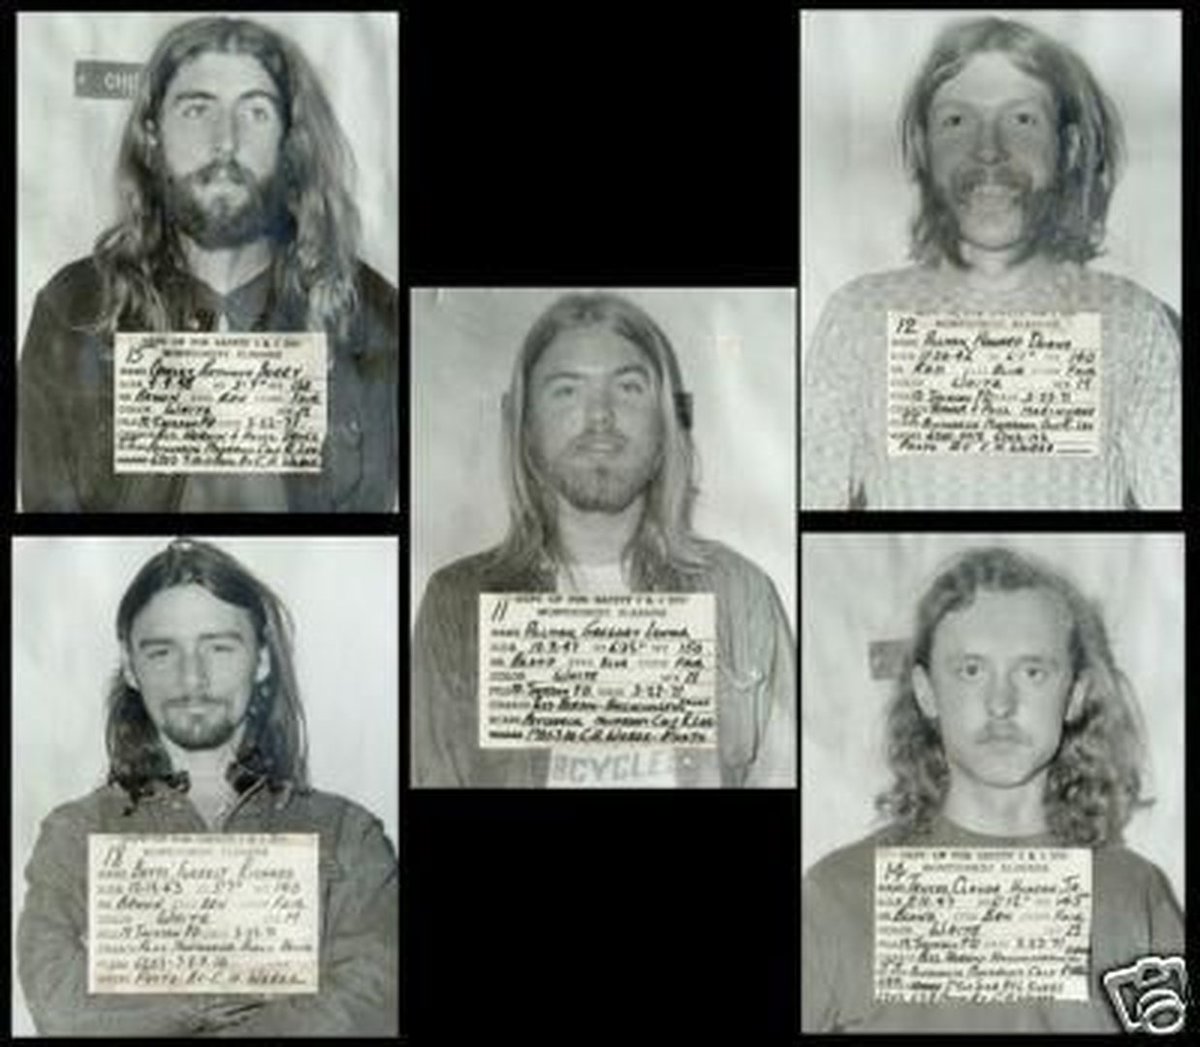 A different kind of ABB #OnThisDay post....Today in history, ABB and the roadies get arrested for drug possession & booked into a jail in Jackson, Al, 3/22/1971. Then moved to Clarke County Jail in Grove Hill, Al & spent the night before being released on $2K bail. #rockstars